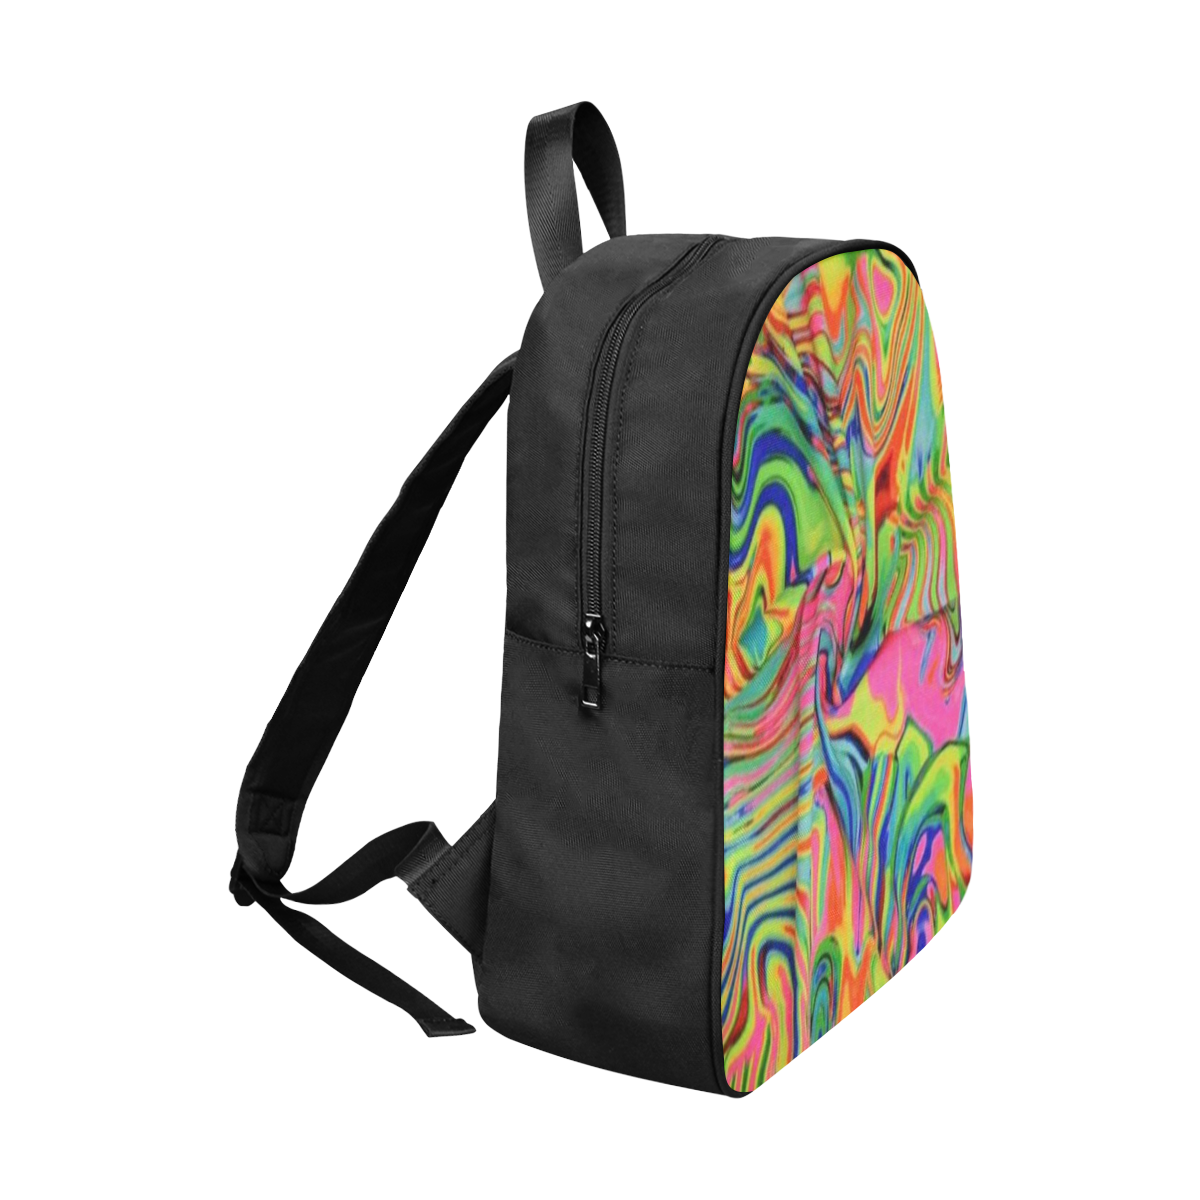 Hippie Vibe Fabric School Backpack (Model 1682) (Large)